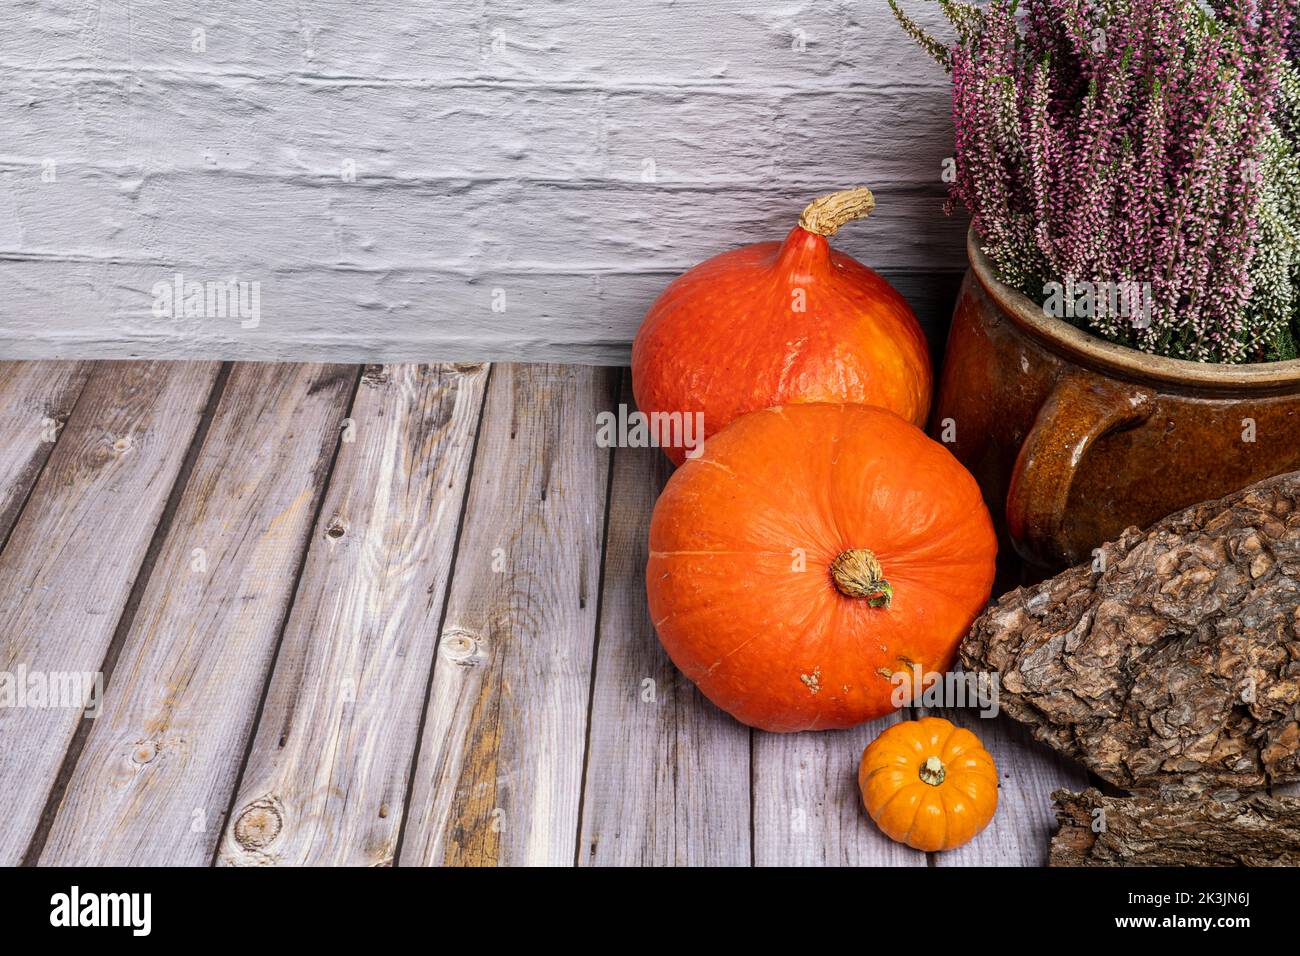 Still life with several Hokkaido pumpkins and a clay jar with winter heather Stock Photo